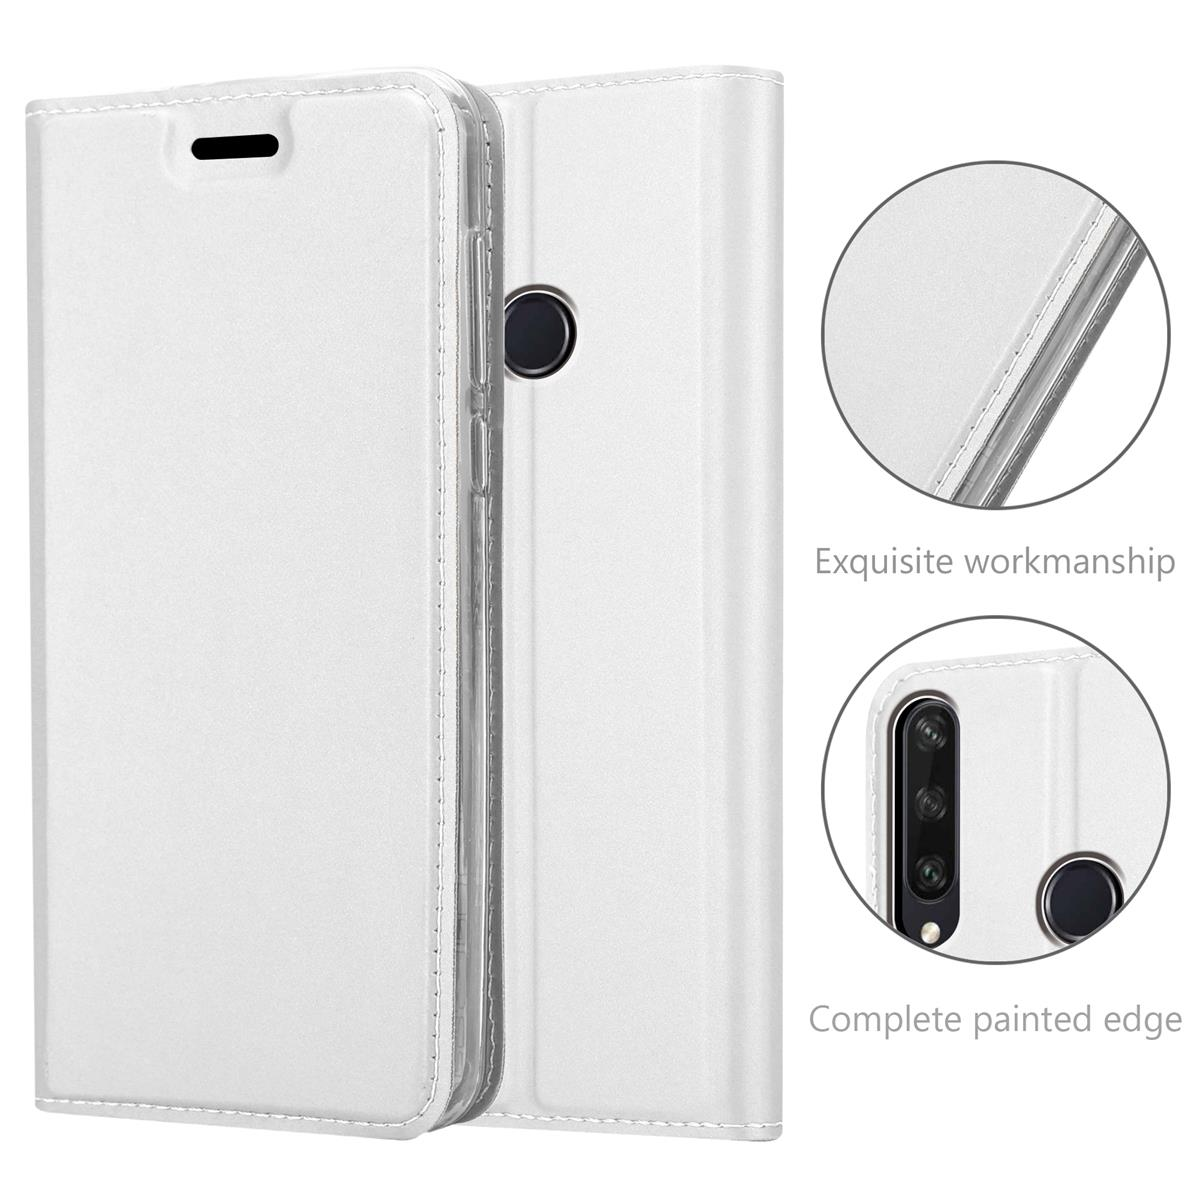 CLASSY SILBER Book Y6P, Classy Style, Huawei, Handyhülle Bookcover, CADORABO